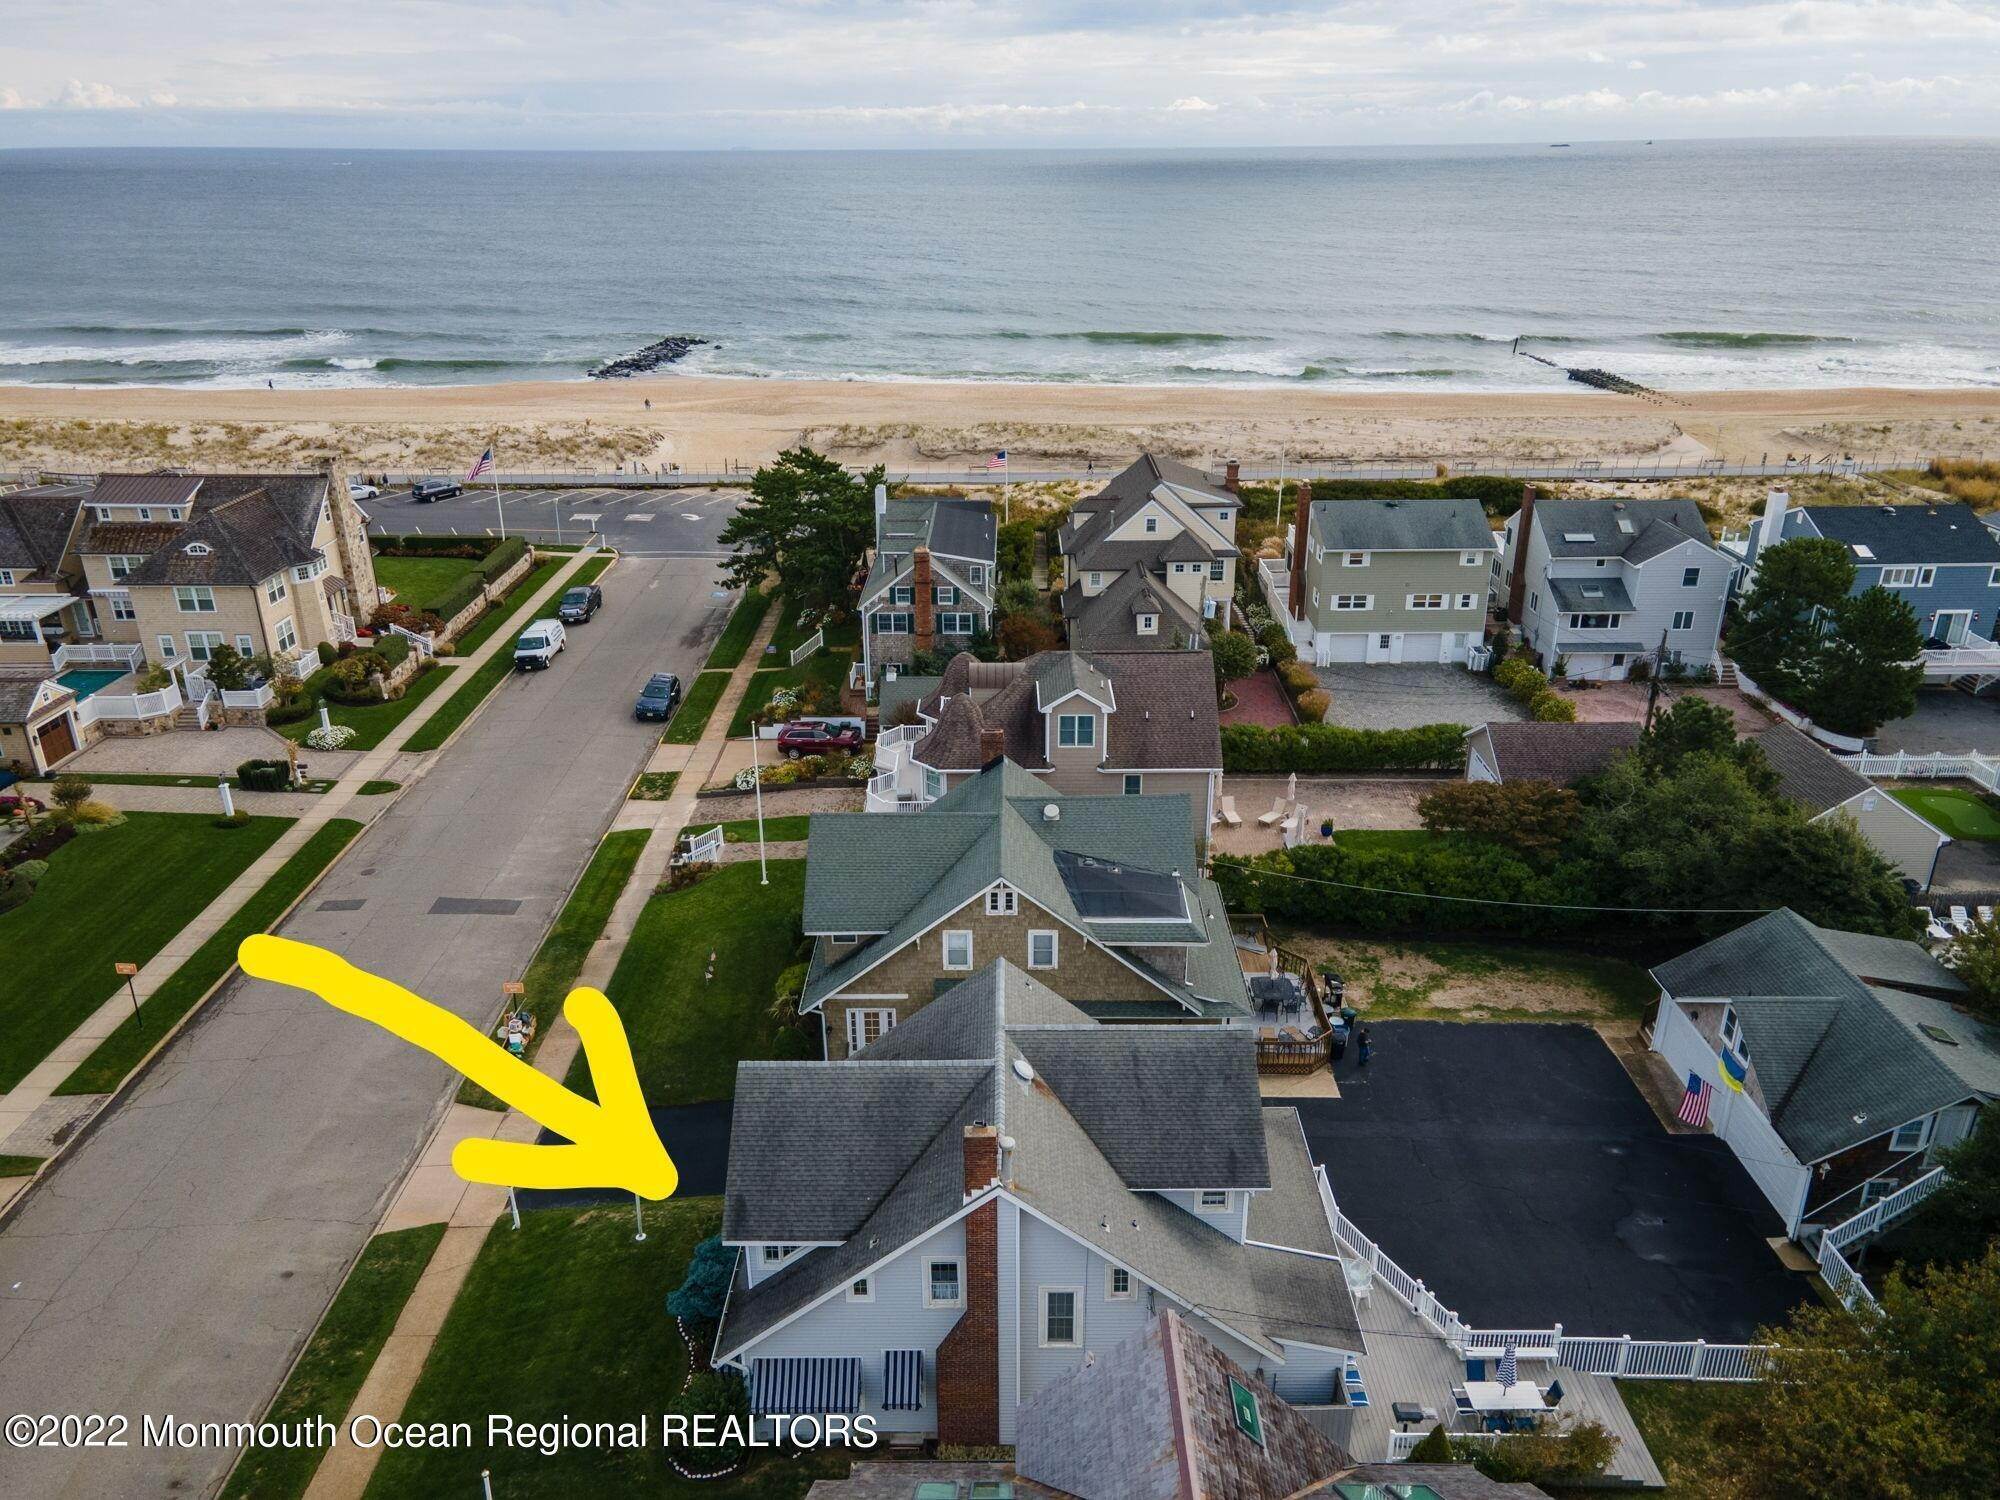 Property for Sale at 6 New York Boulevard Sea Girt, New Jersey 08750 United States